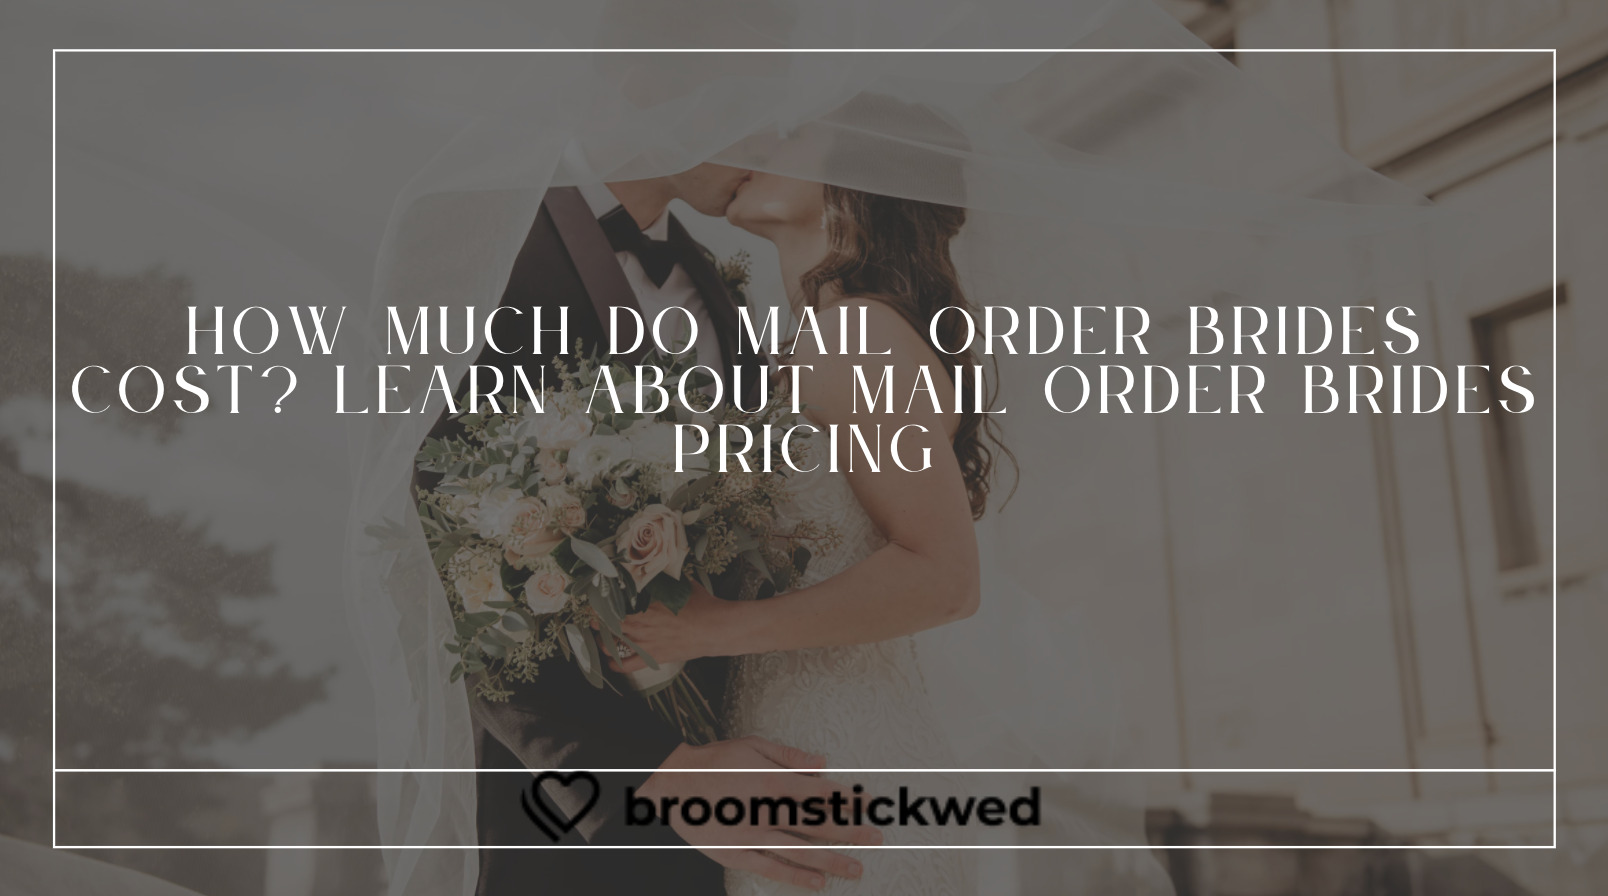 How Much Do Mail Mail Order Brides Cost? Learn About Mail Order Brides Pricing